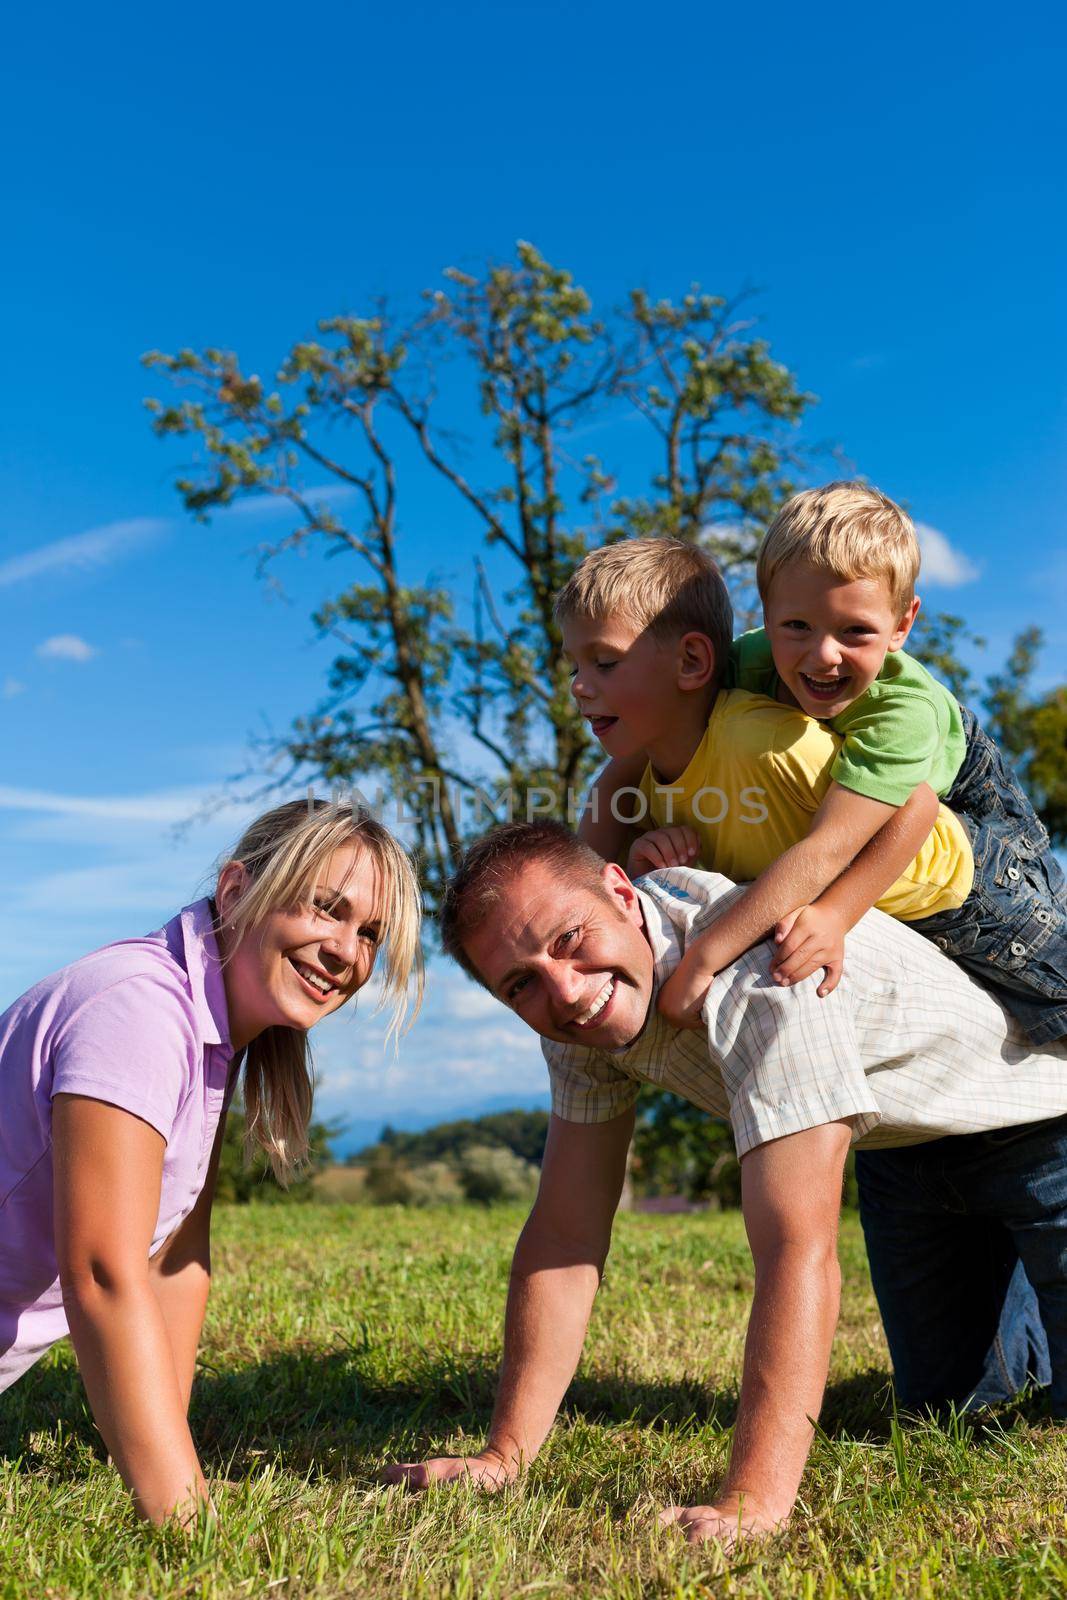 Happy family with two little boys playing in the grass on a summer meadow